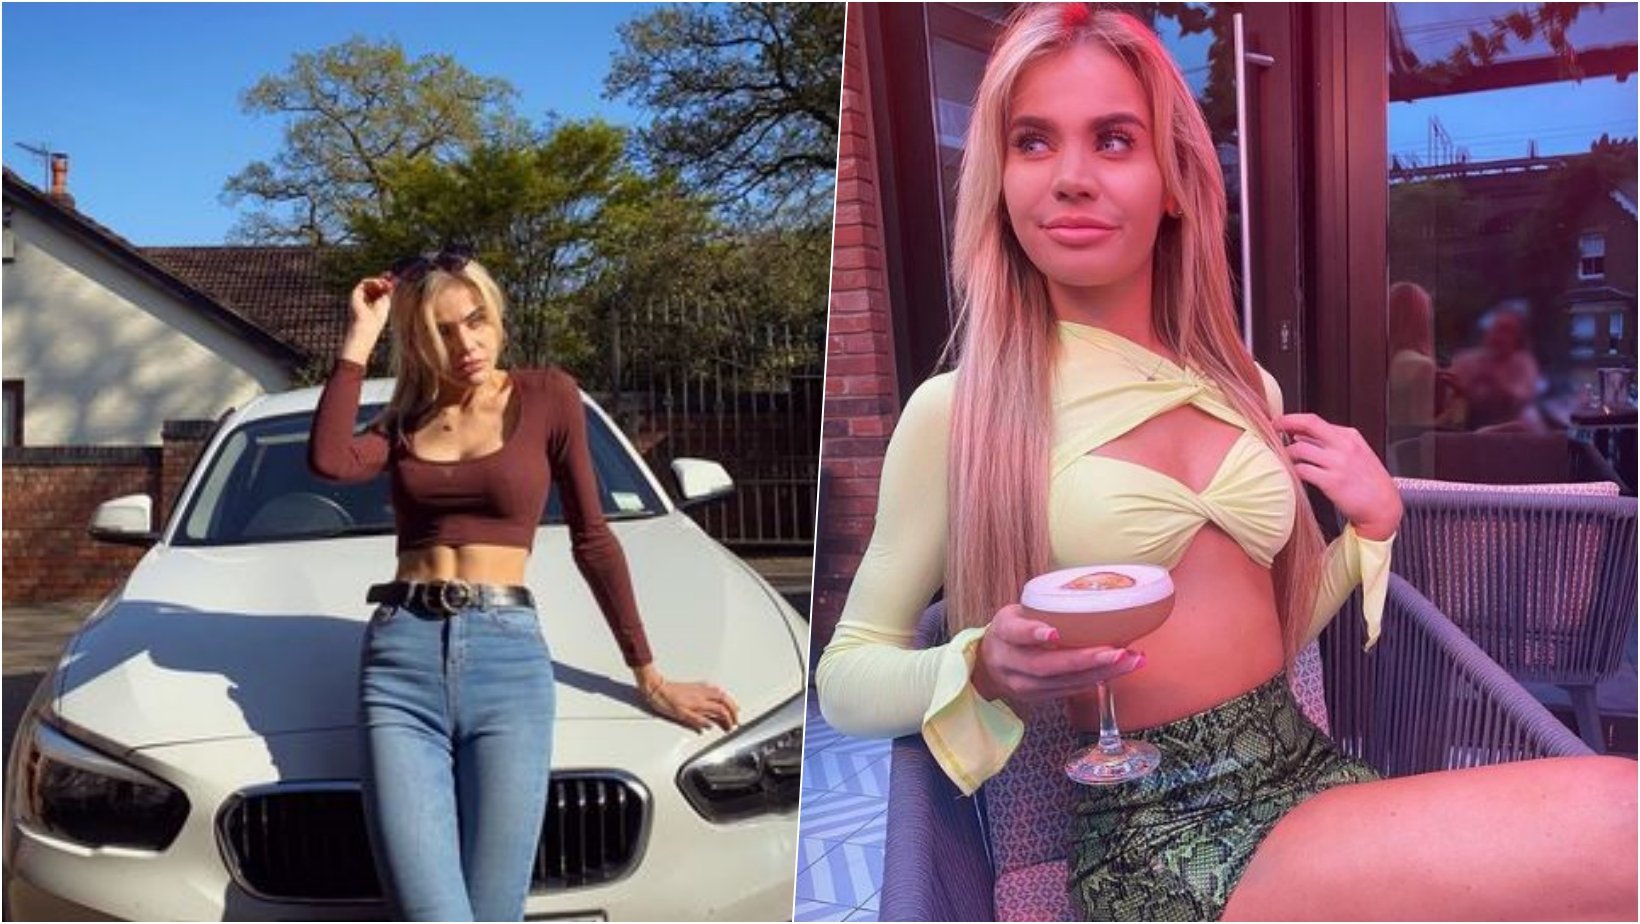 6 facebook cover 10.jpg?resize=412,275 - Socialite Caught Drunk-Driving Begs Judge Not To Ban Her License, Saying She Doesn’t Want To Use Public Transport